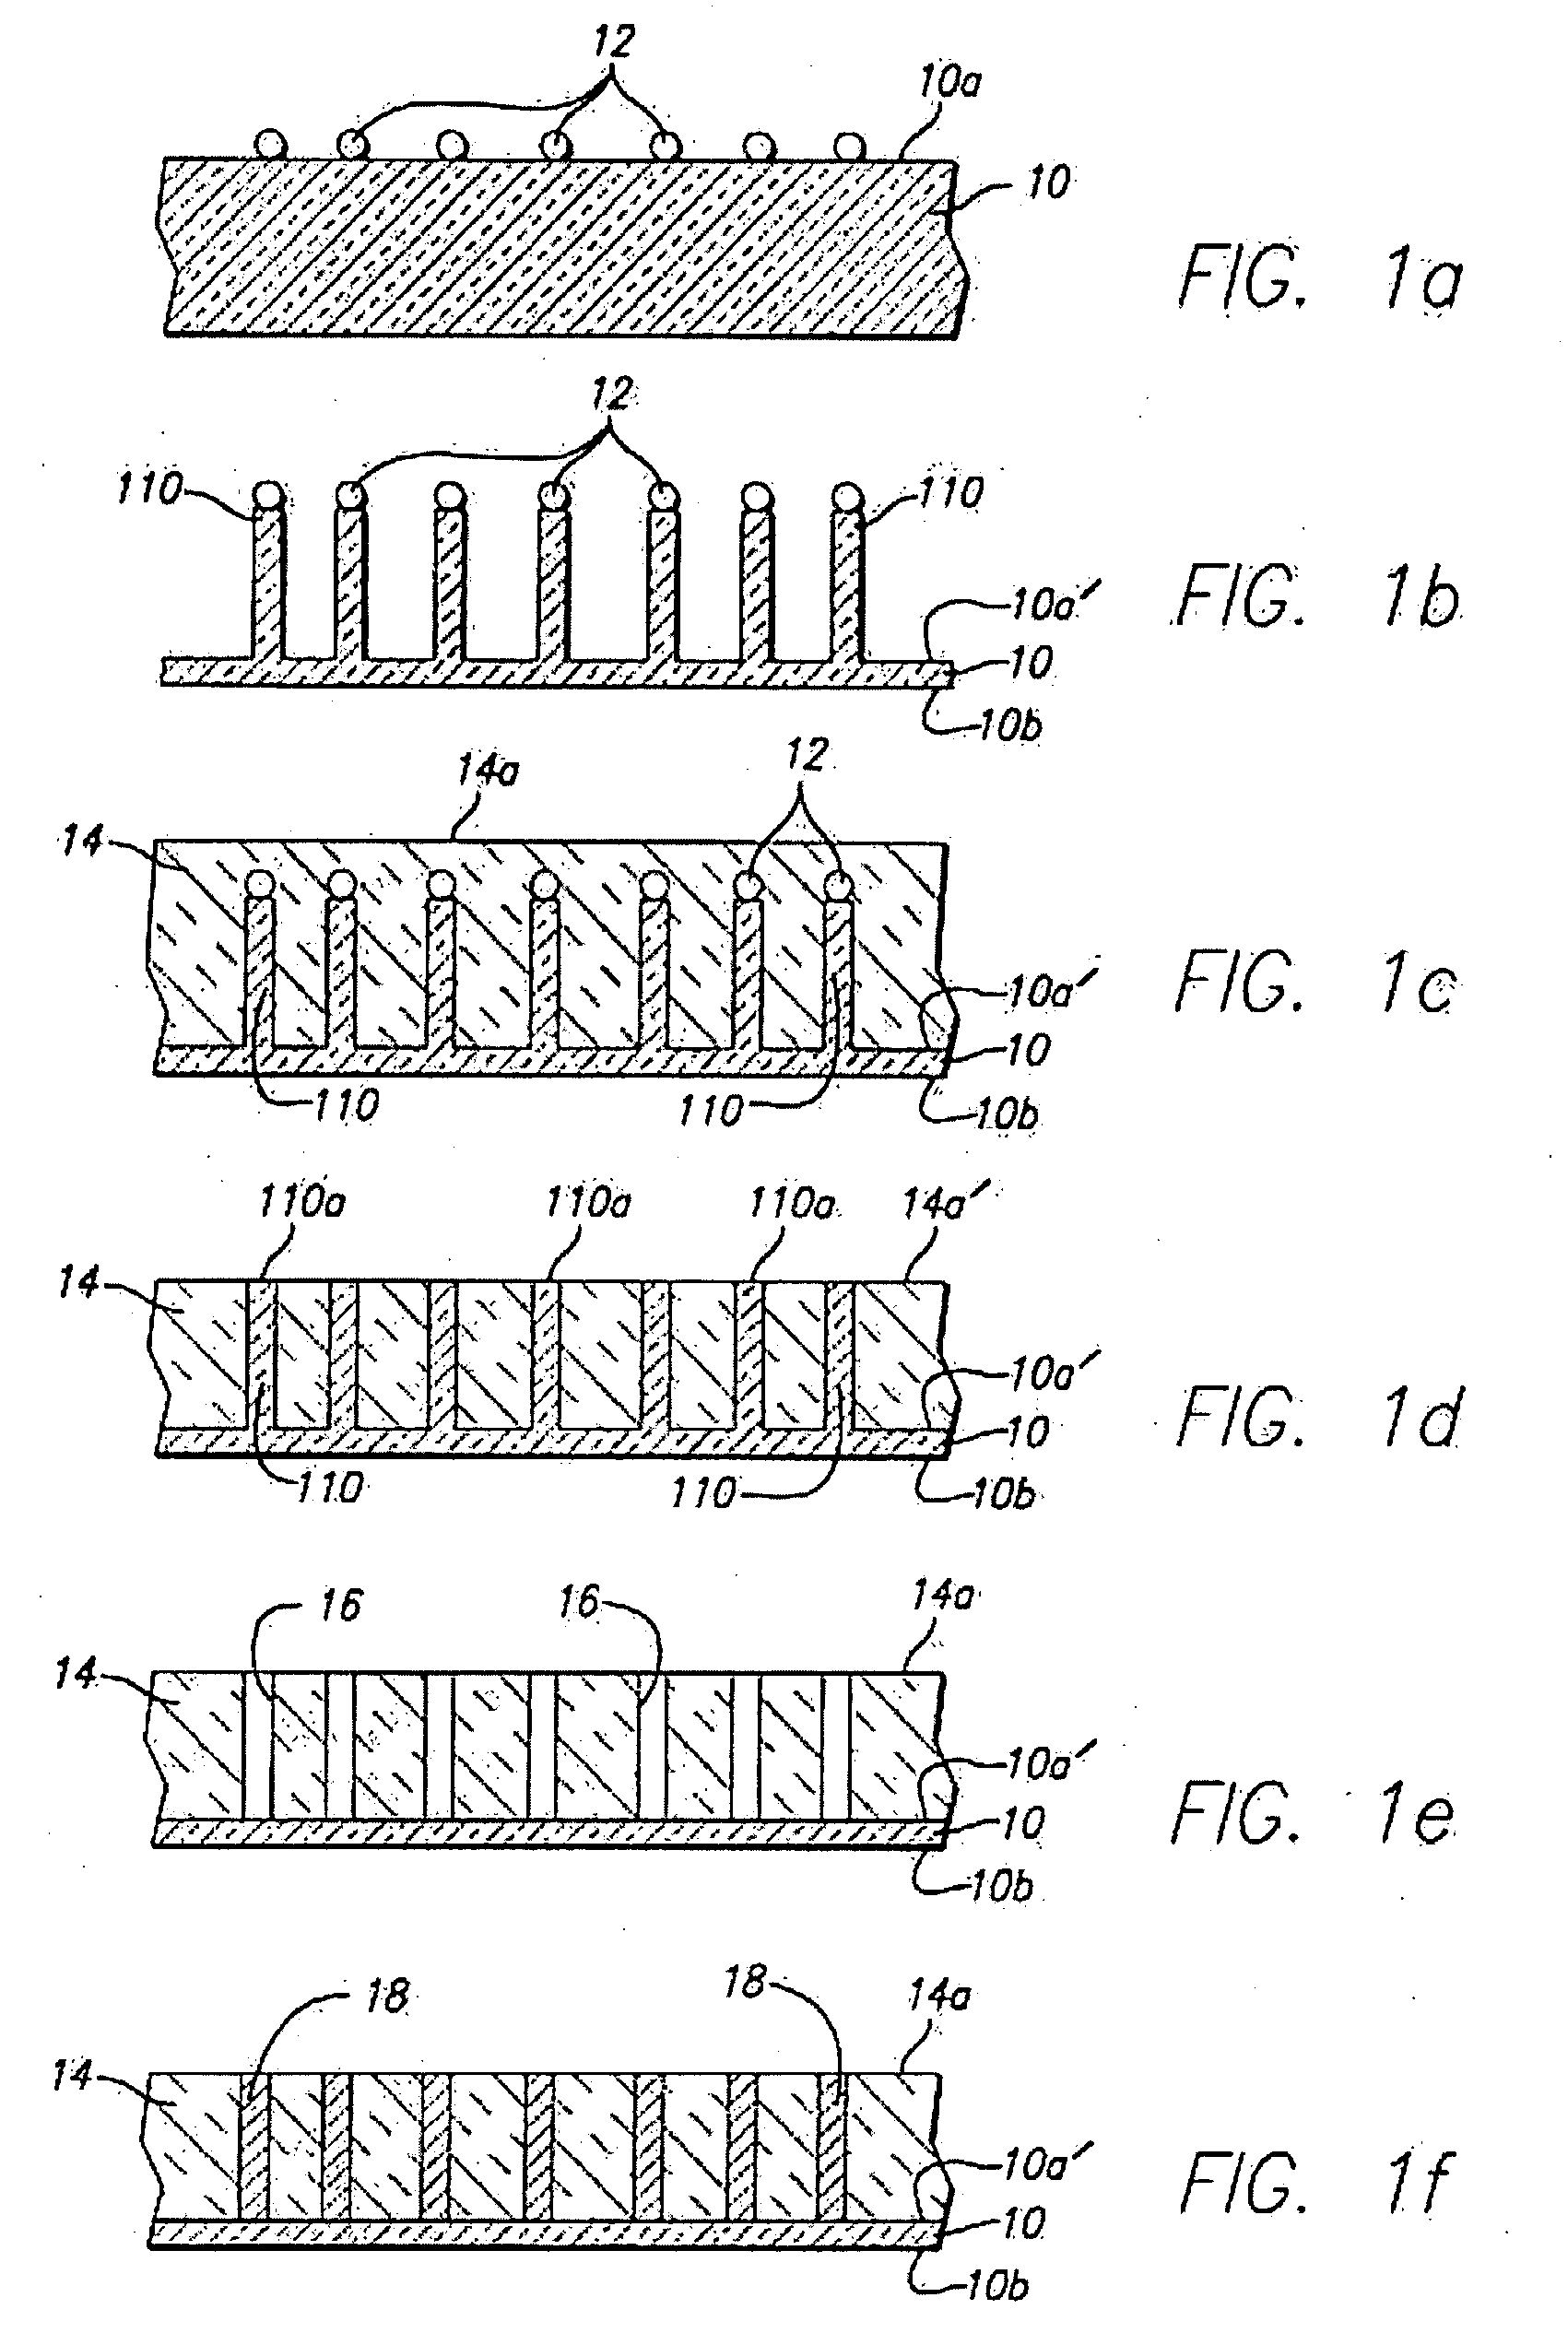 Method of forming one or more nanopores for aligning molecules for molecular electronics